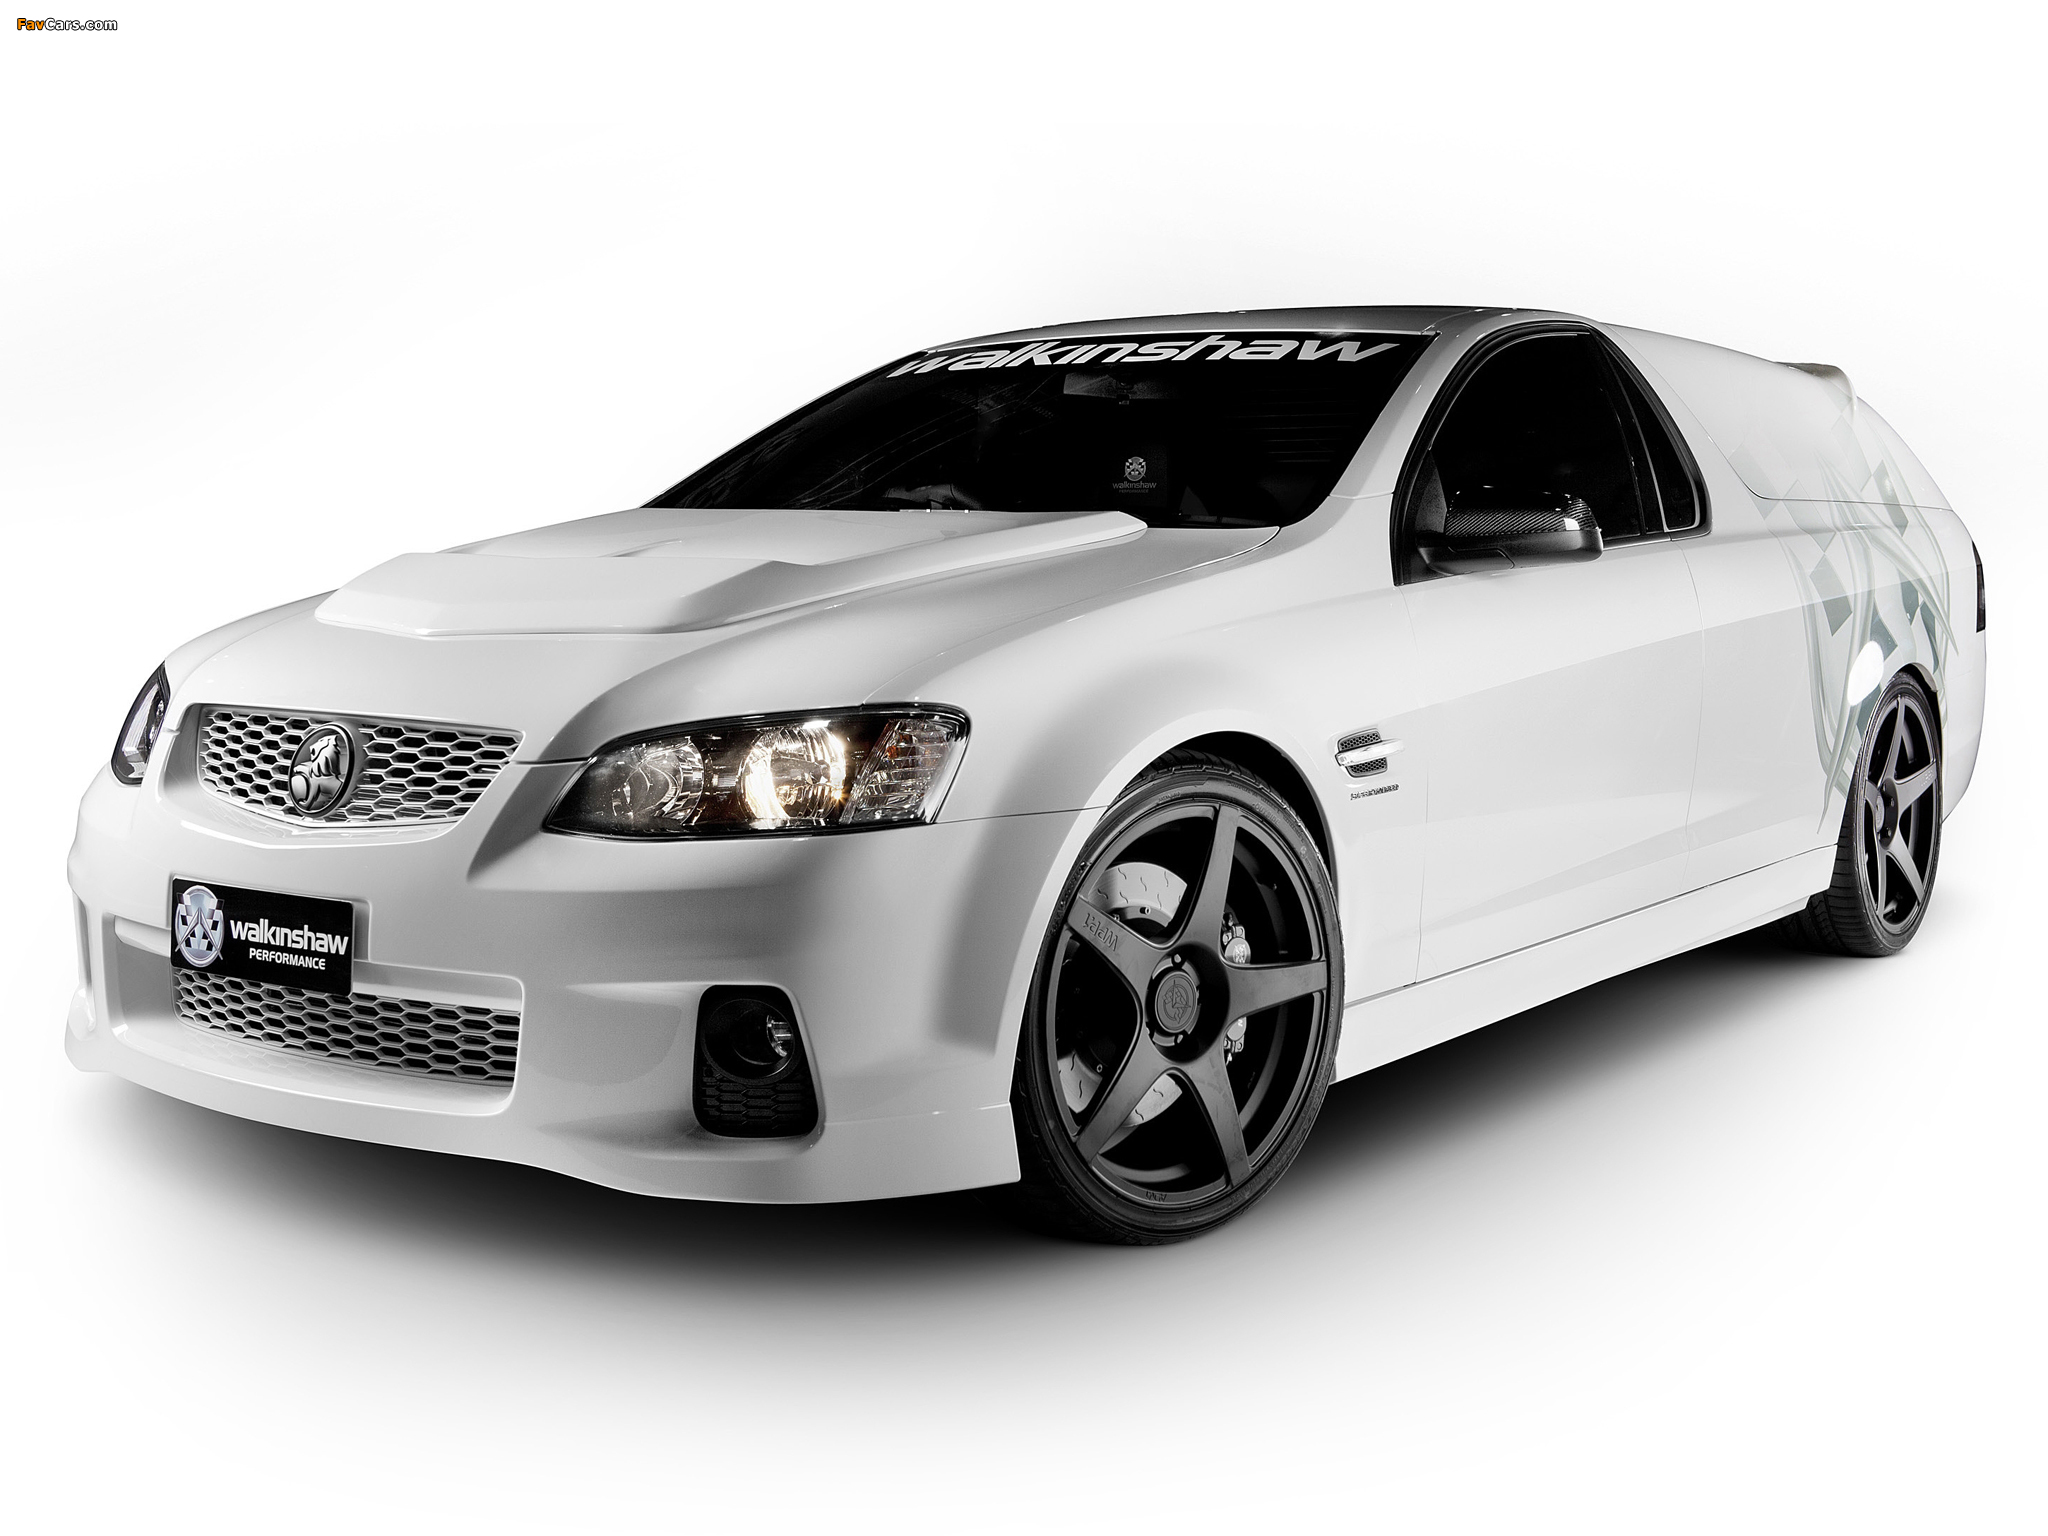 Walkinshaw Performance Holden Commodore SuperUte (VE) 2011 photos (2048 x 1536)